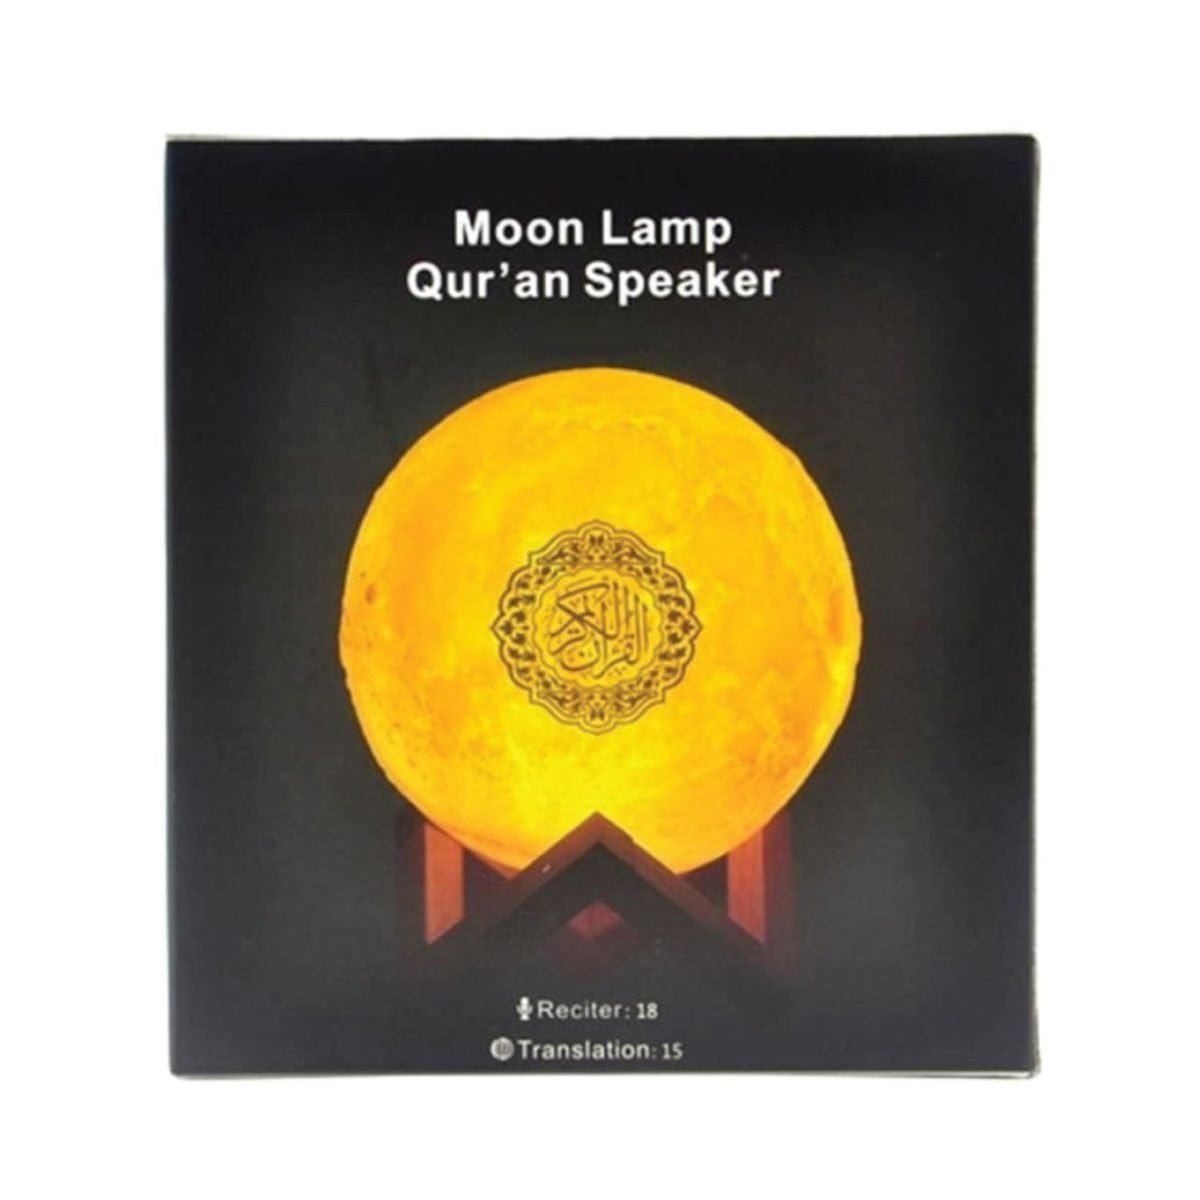 Weqweasd 29 Moon Lamp Qur'An Speaker - Moon Lamp With Quran Recitation - Sq-510With Rechargeable Remote Control, Full Recitations Of Famous Imams And Translation Of The Qur'An Into Many Languages, Including English, Arabic, French, Spanish, German, ... Contains 18 Recitations And 15 Languages Moon Lamp Qur'An Speaker Moon Lamp Qur'An Speaker Sq-510 (18 Reciter, 15 Translation)